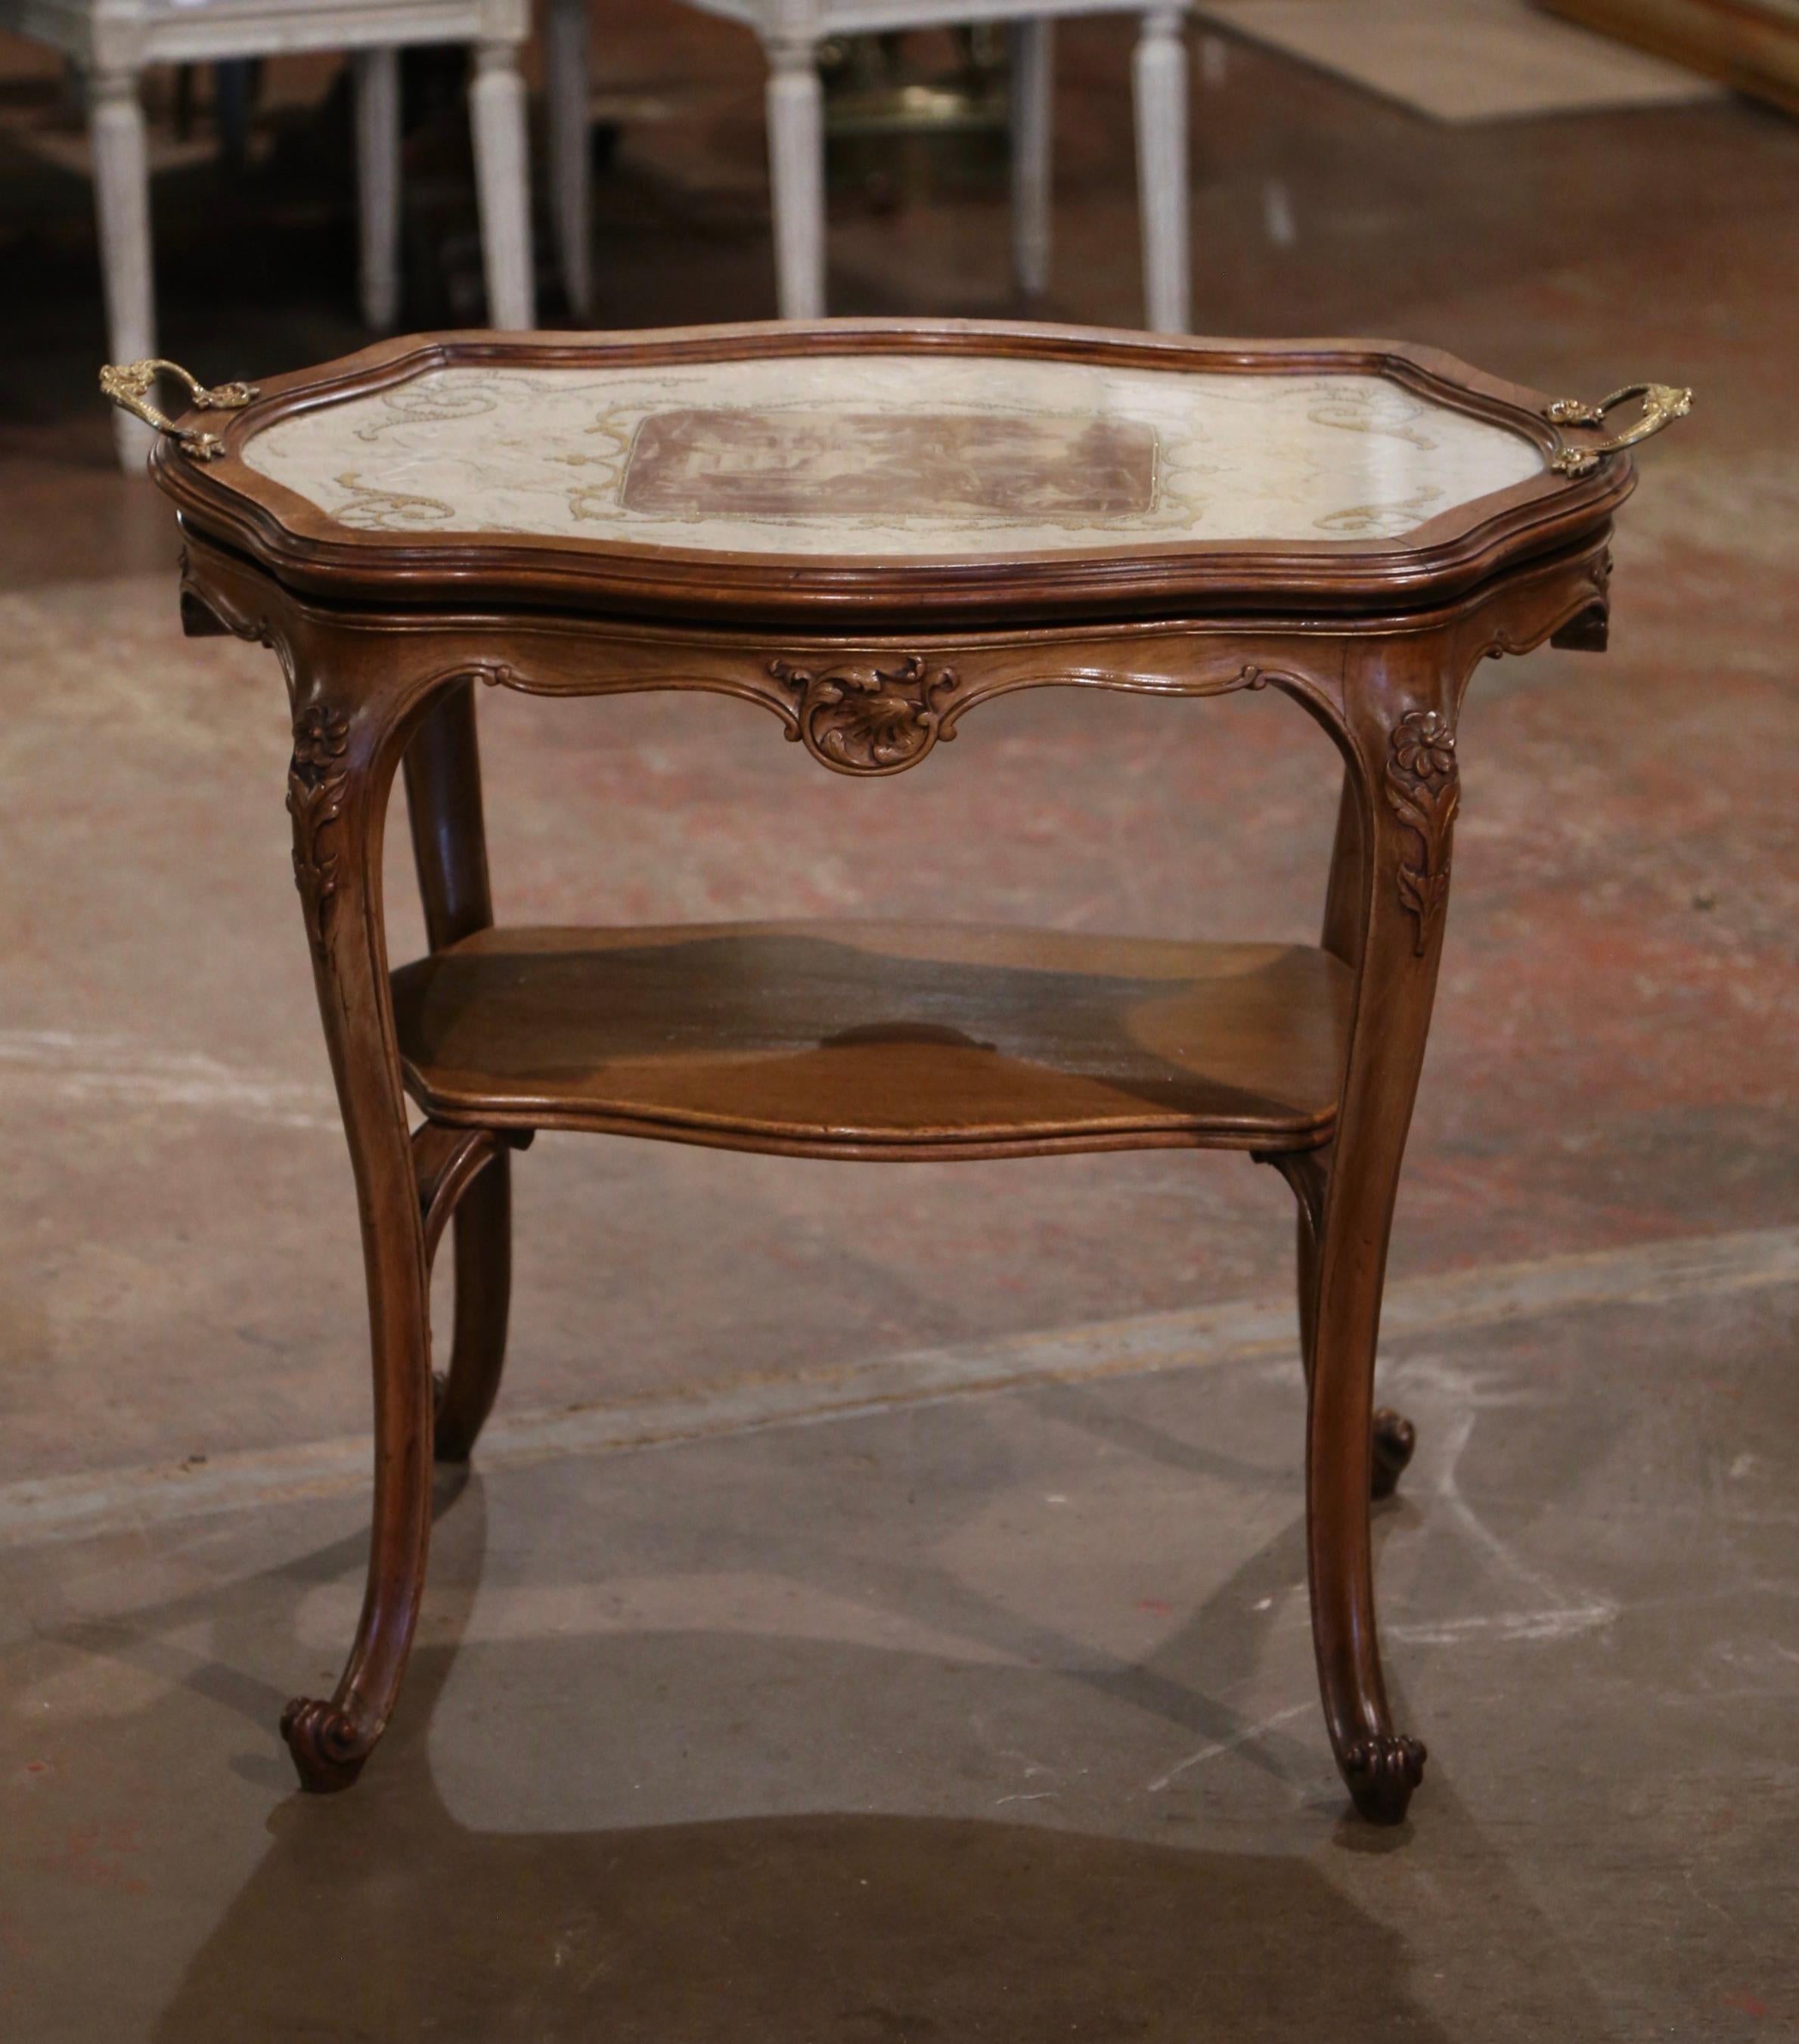 Use this elegant service table in your dining room to serve tea or dessert. Crafted in Provence France circa 1920, the table stands on cabriole legs decorated with acanthus leaf motifs at the shoulders, ending with escargot feet. The table features